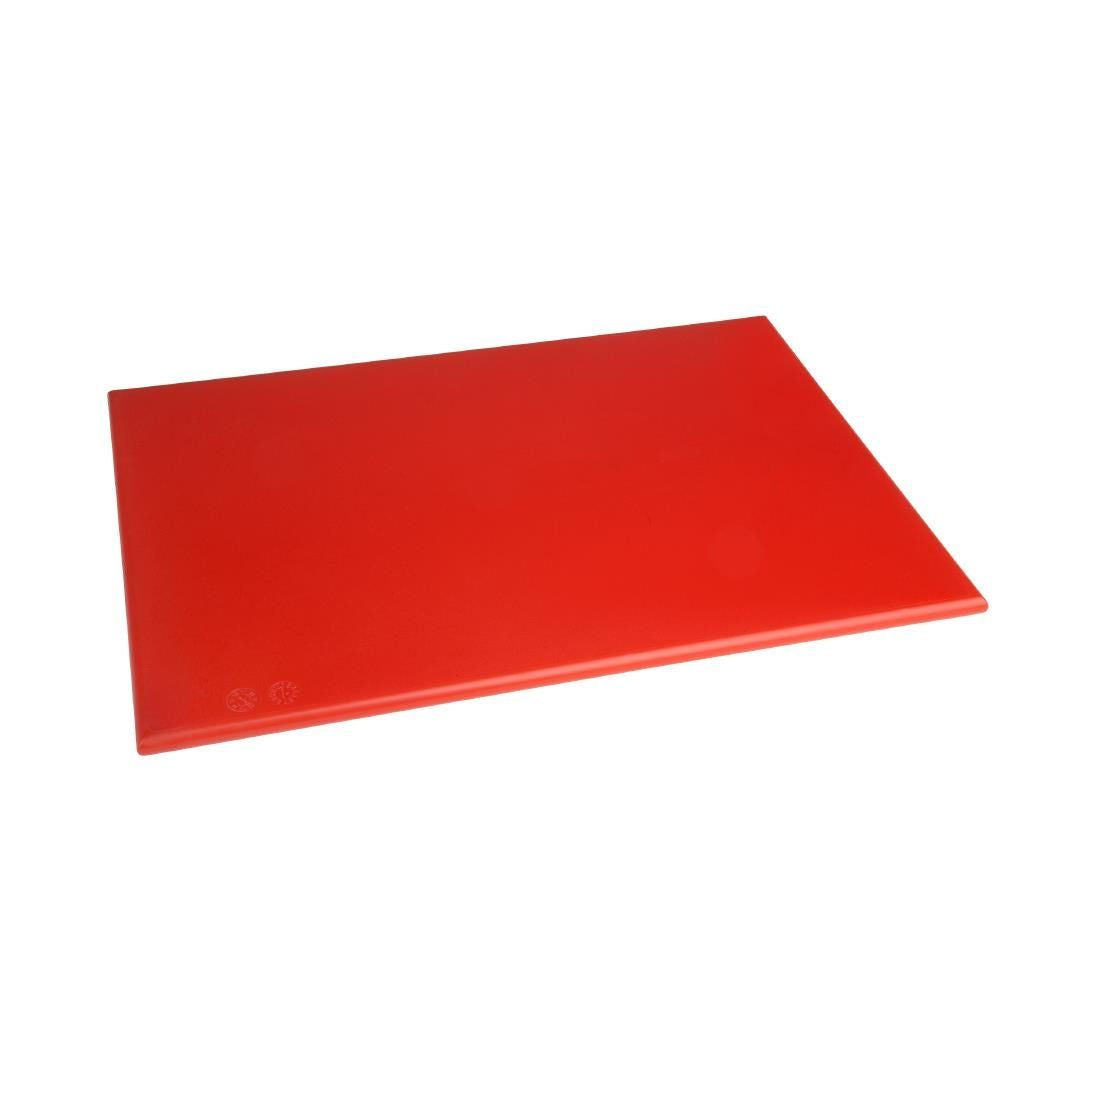 Hygiplas Anti Microbial High Density Red Chopping Board JD Catering Equipment Solutions Ltd